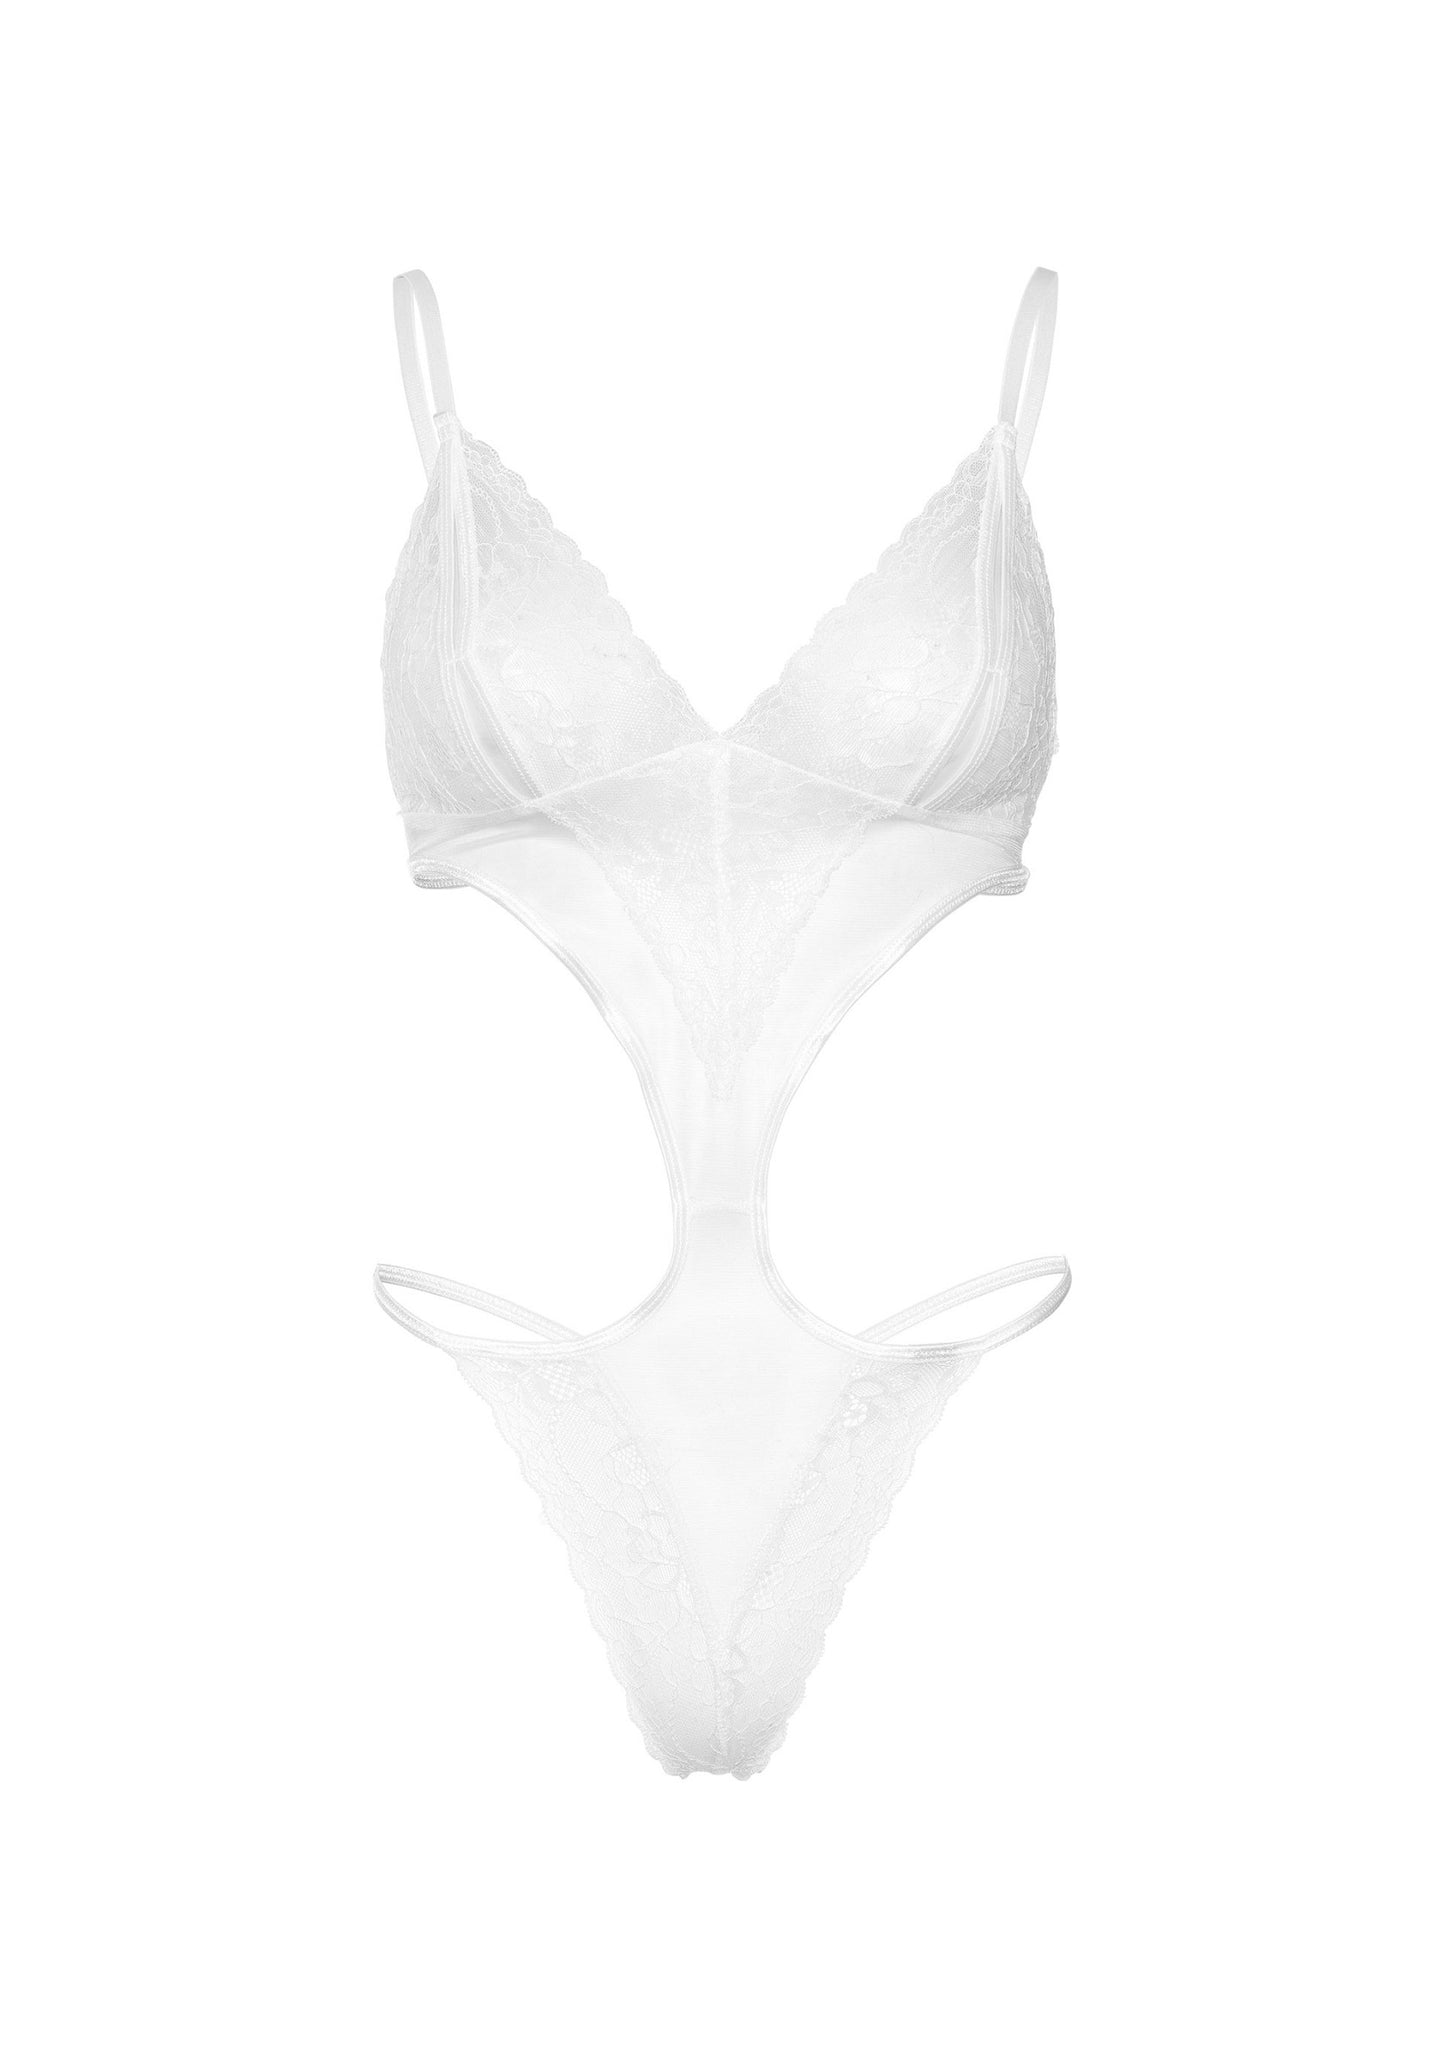 Daring Intimates Cut-out Peek-a-Boo Teddy WHITE S/M - 0